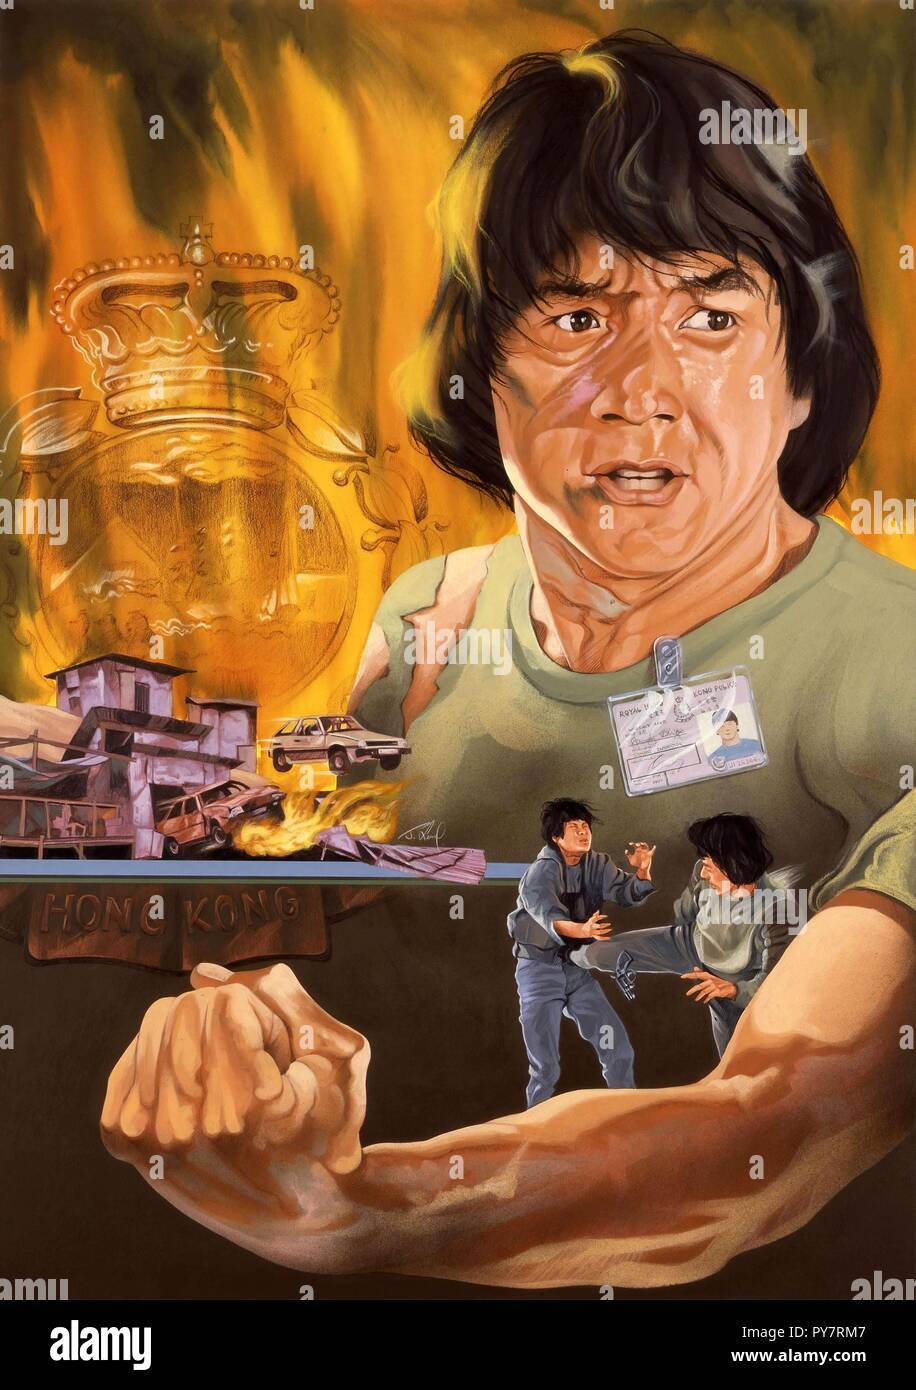 Jackie Chan Wallpaper  Download to your mobile from PHONEKY